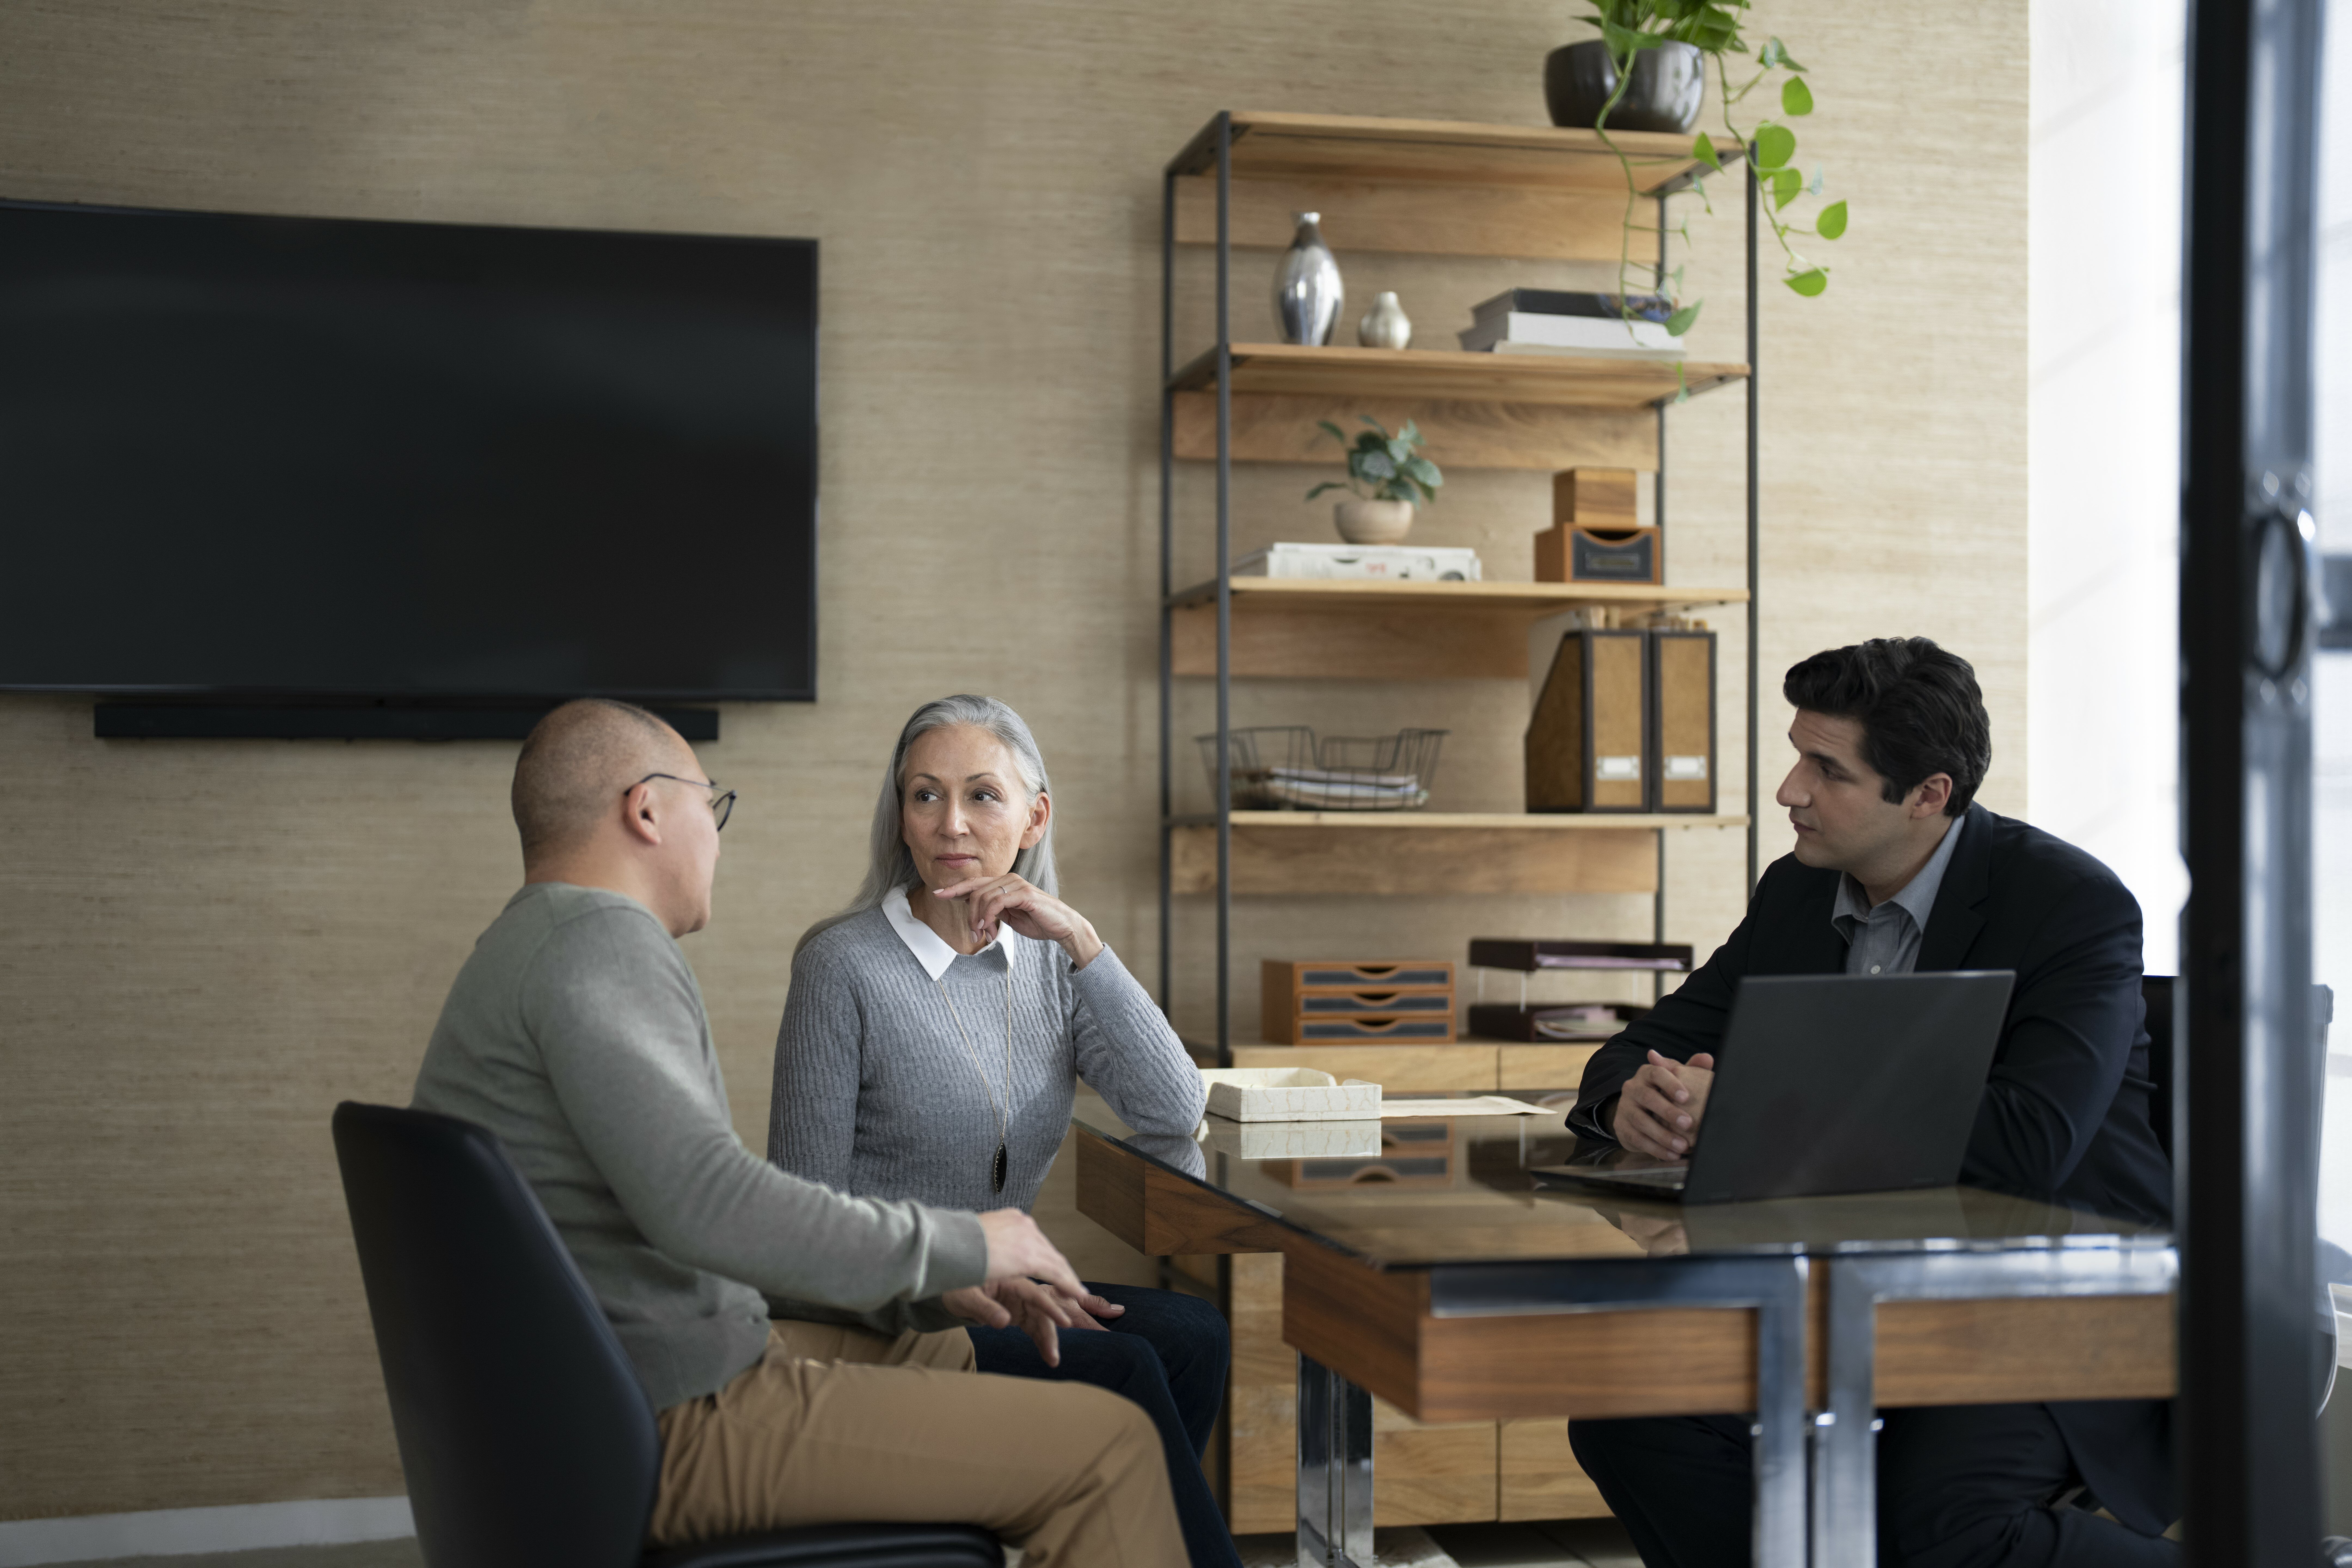 A group of three people having a discussion in the office.